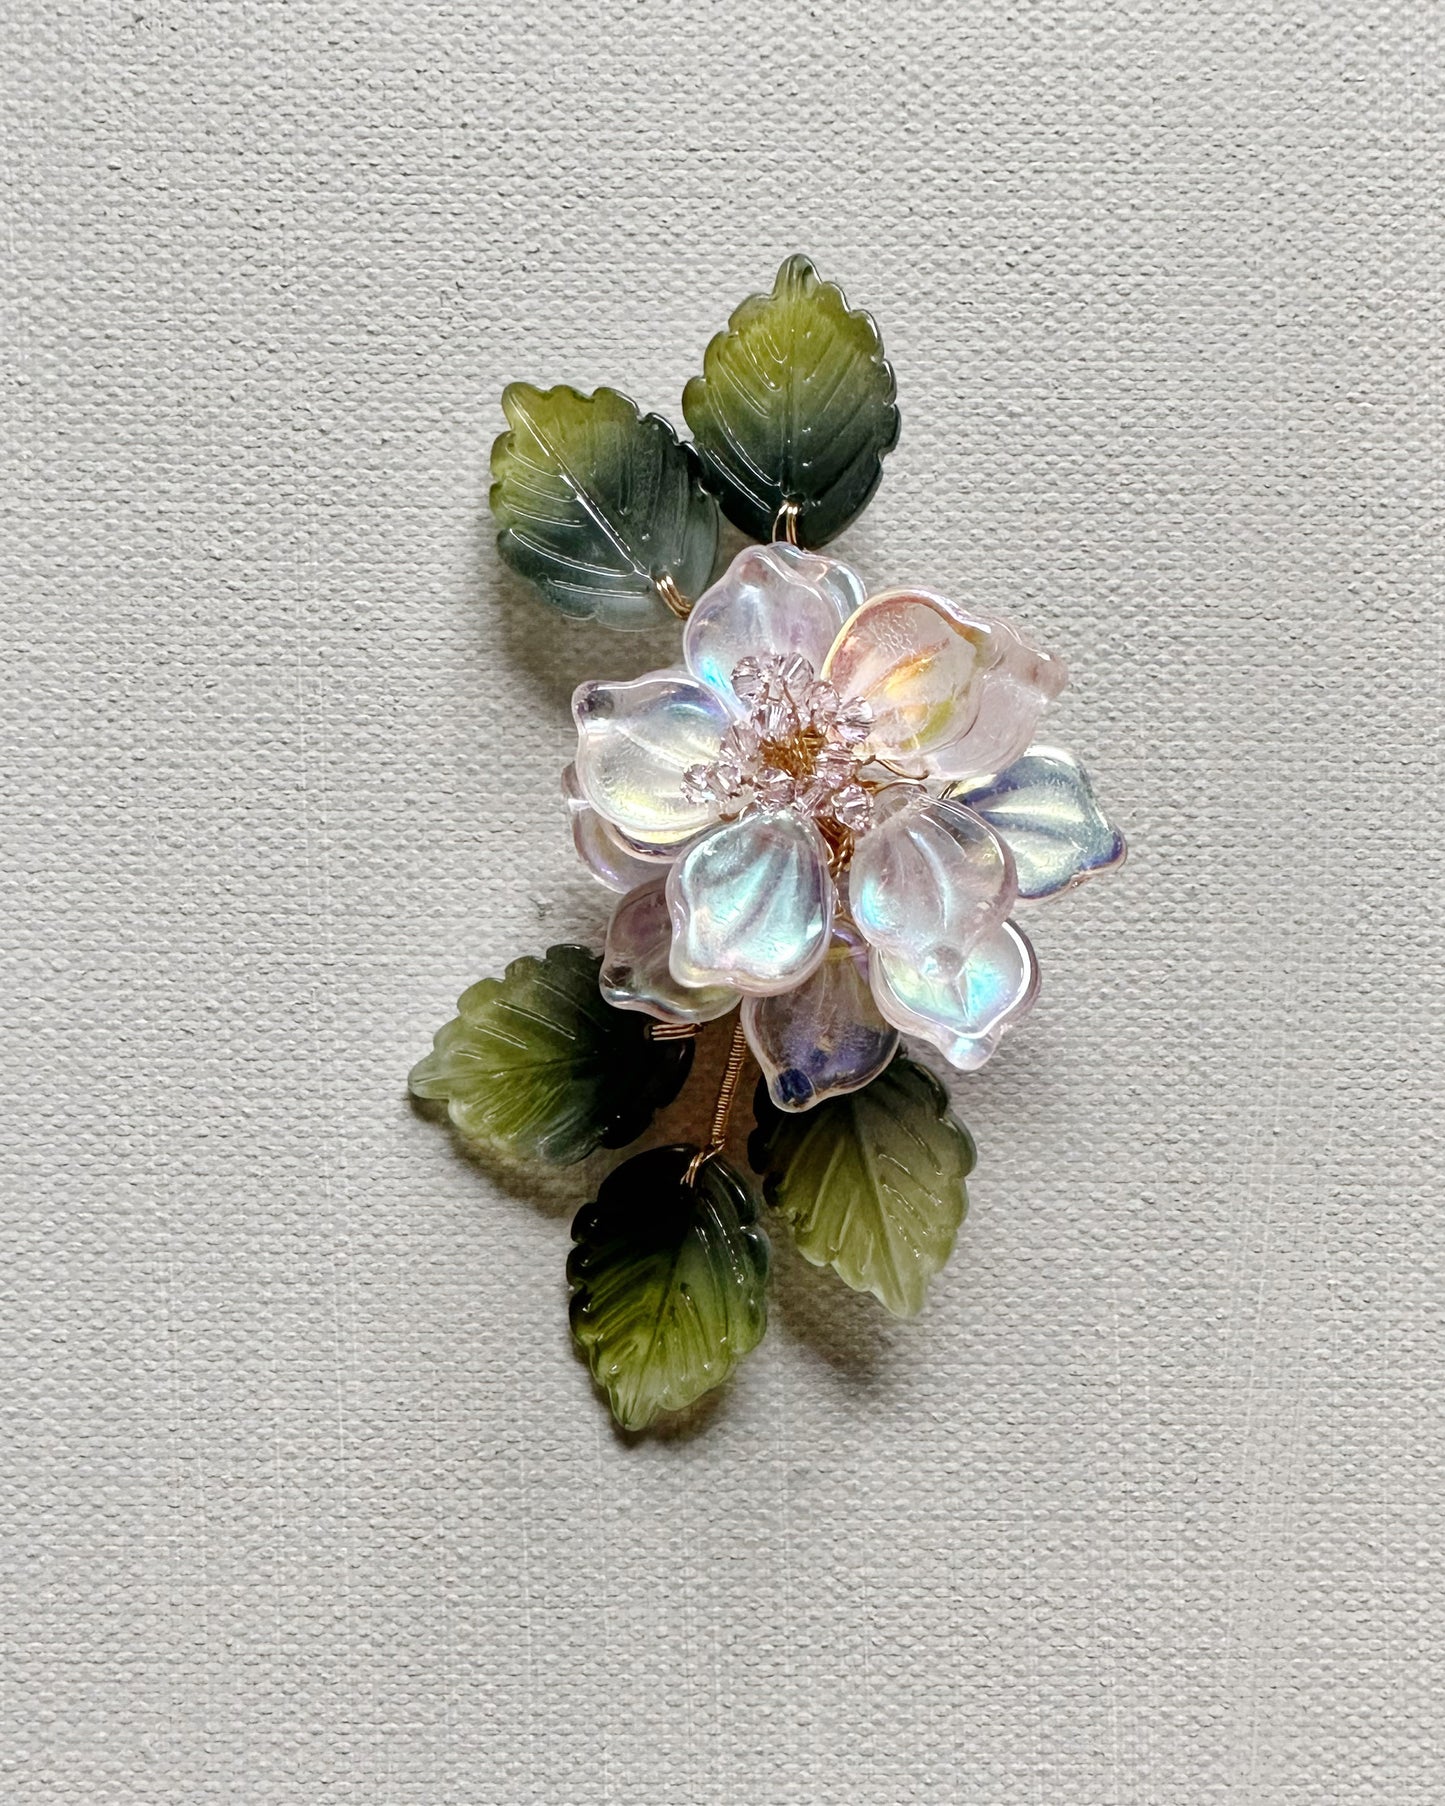 The new peony collar brooch in AB pink